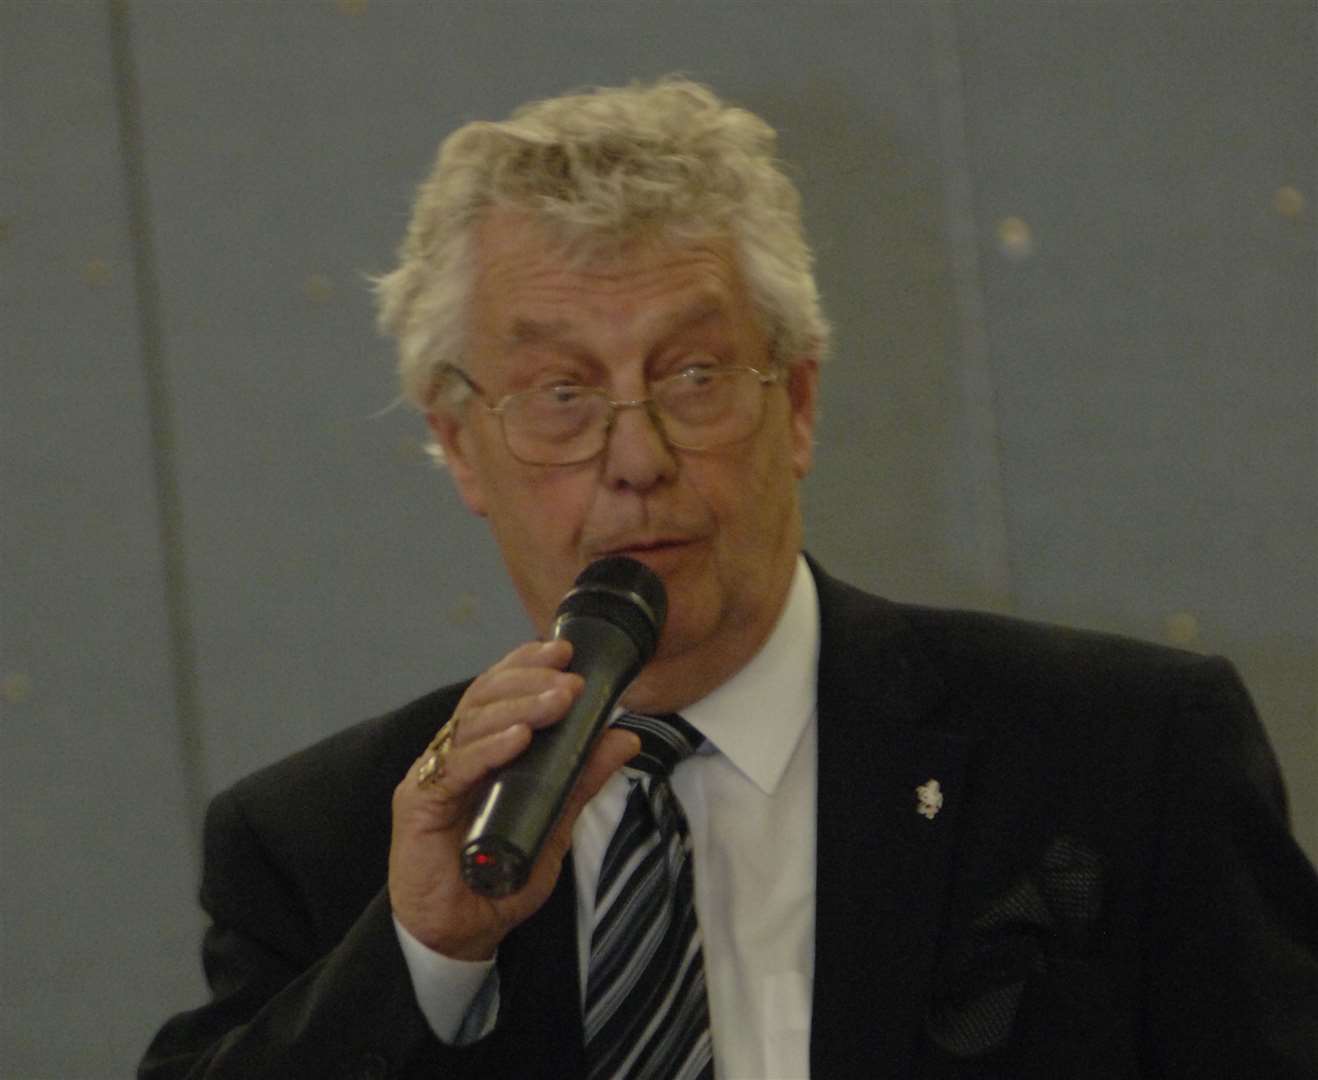 Cllr Alan Marsh represents Herne and Sturry. Picture: Chris Davey